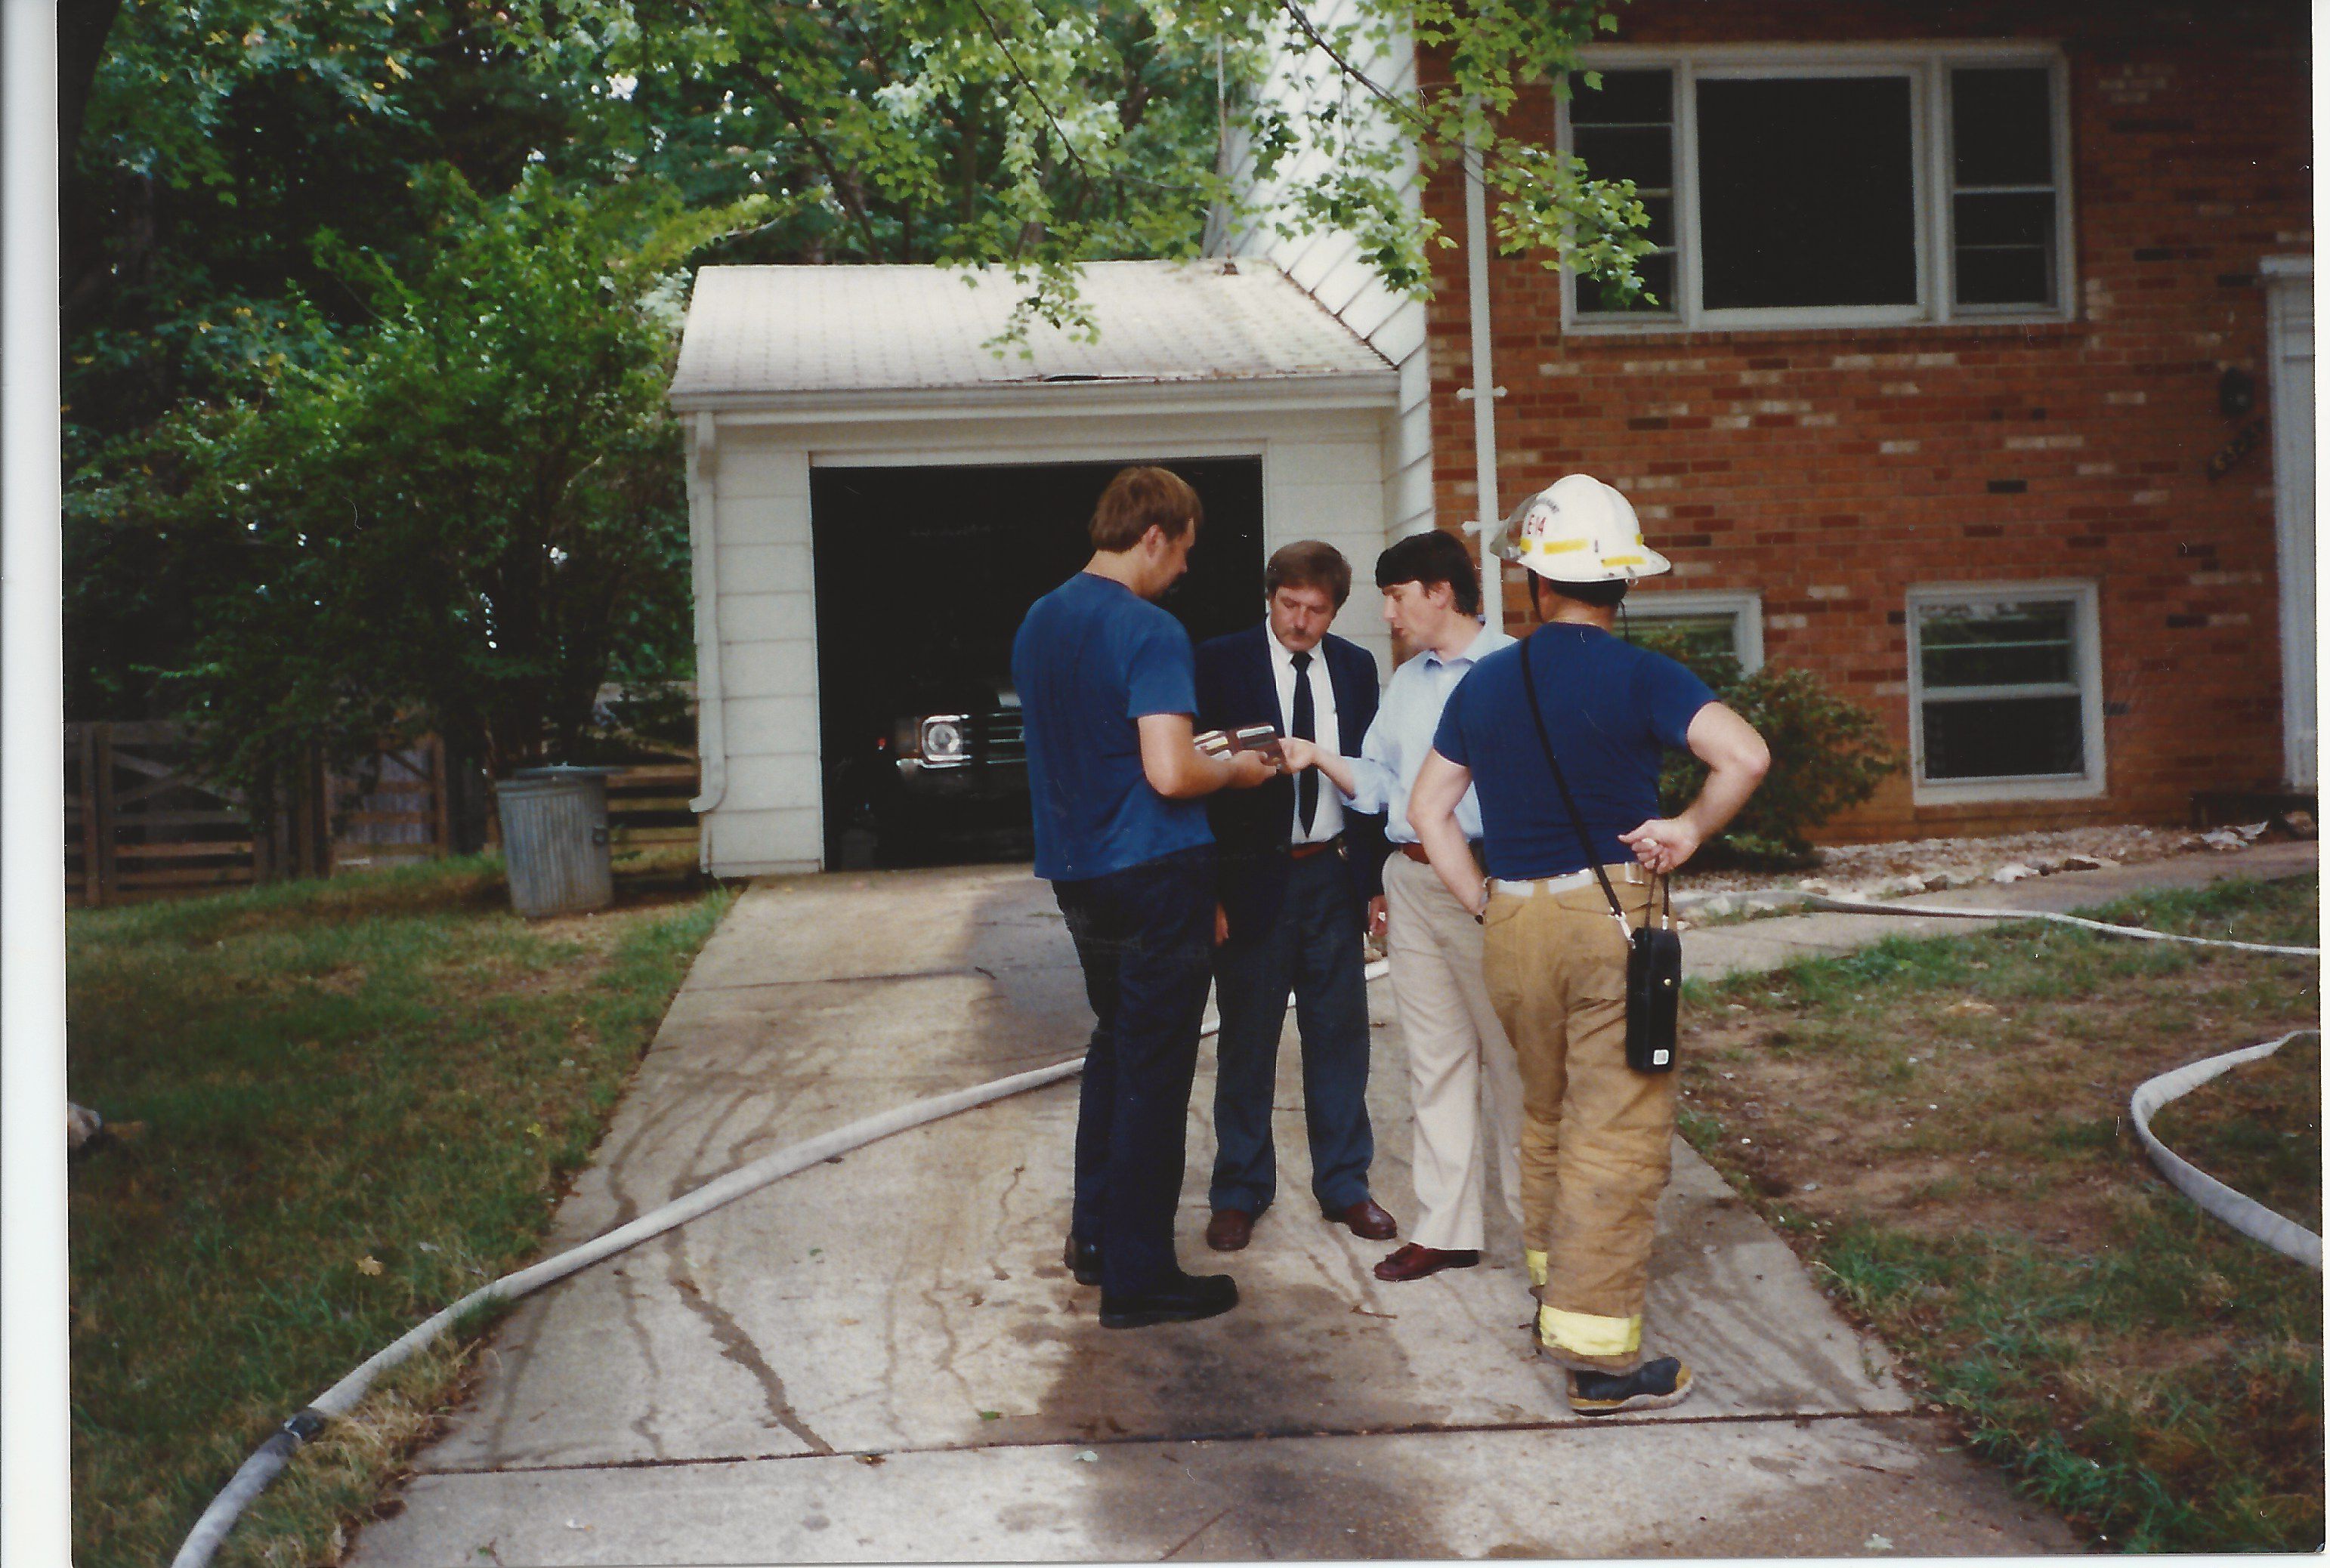  Joseph Bertoni works with local fire investigators at an incident